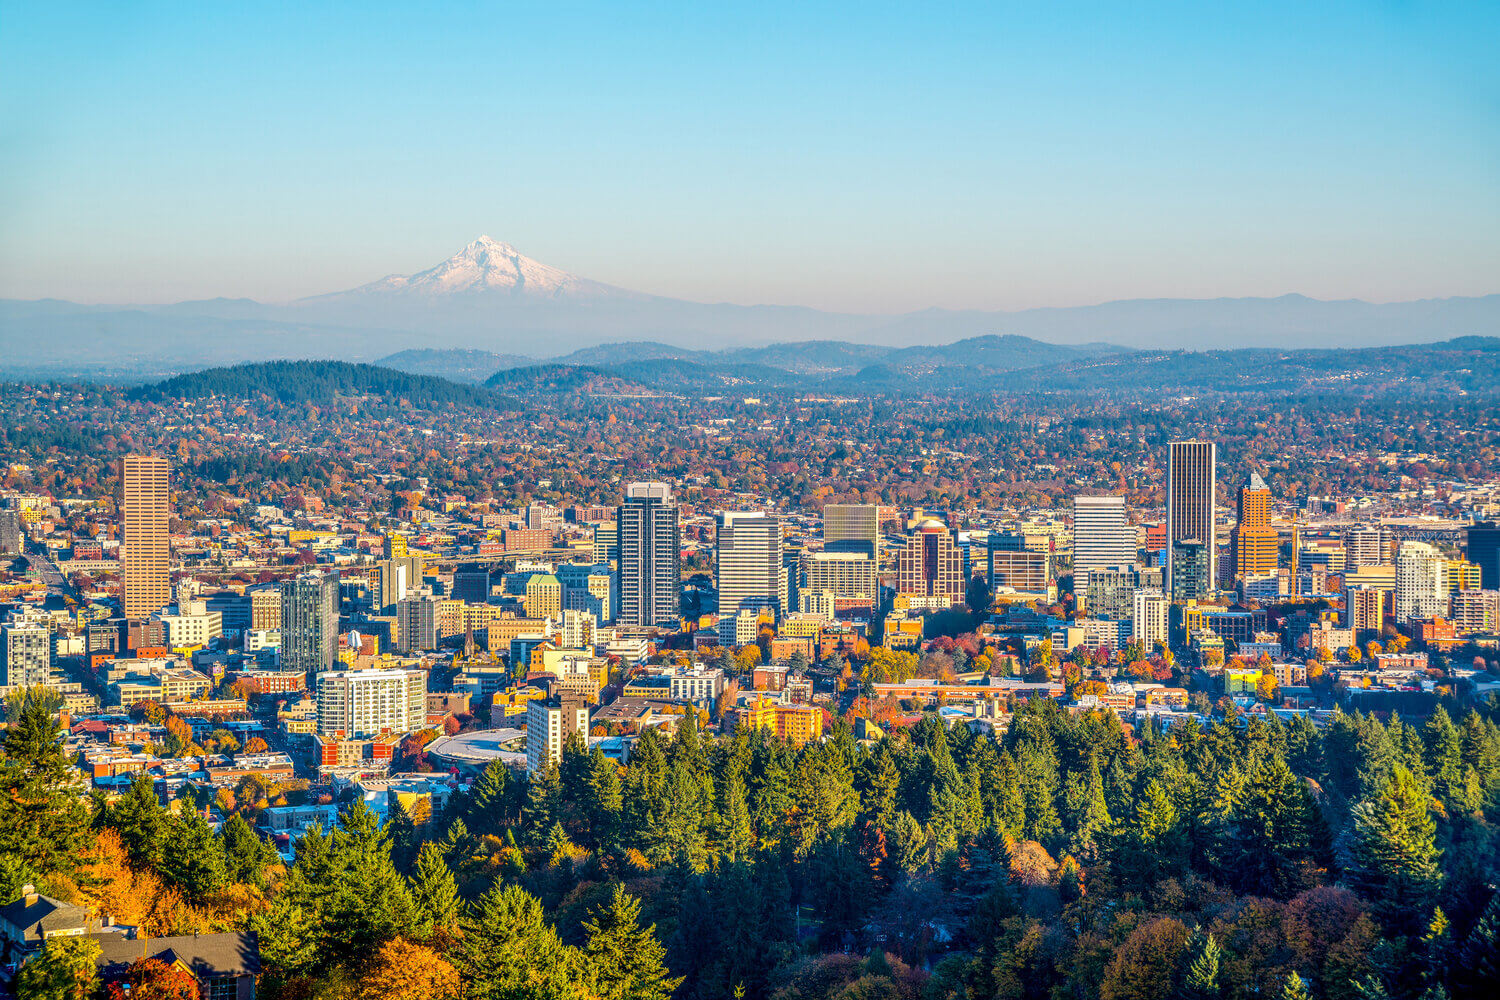 Distant view of Portland, Oregon with city scape and Mount Hood